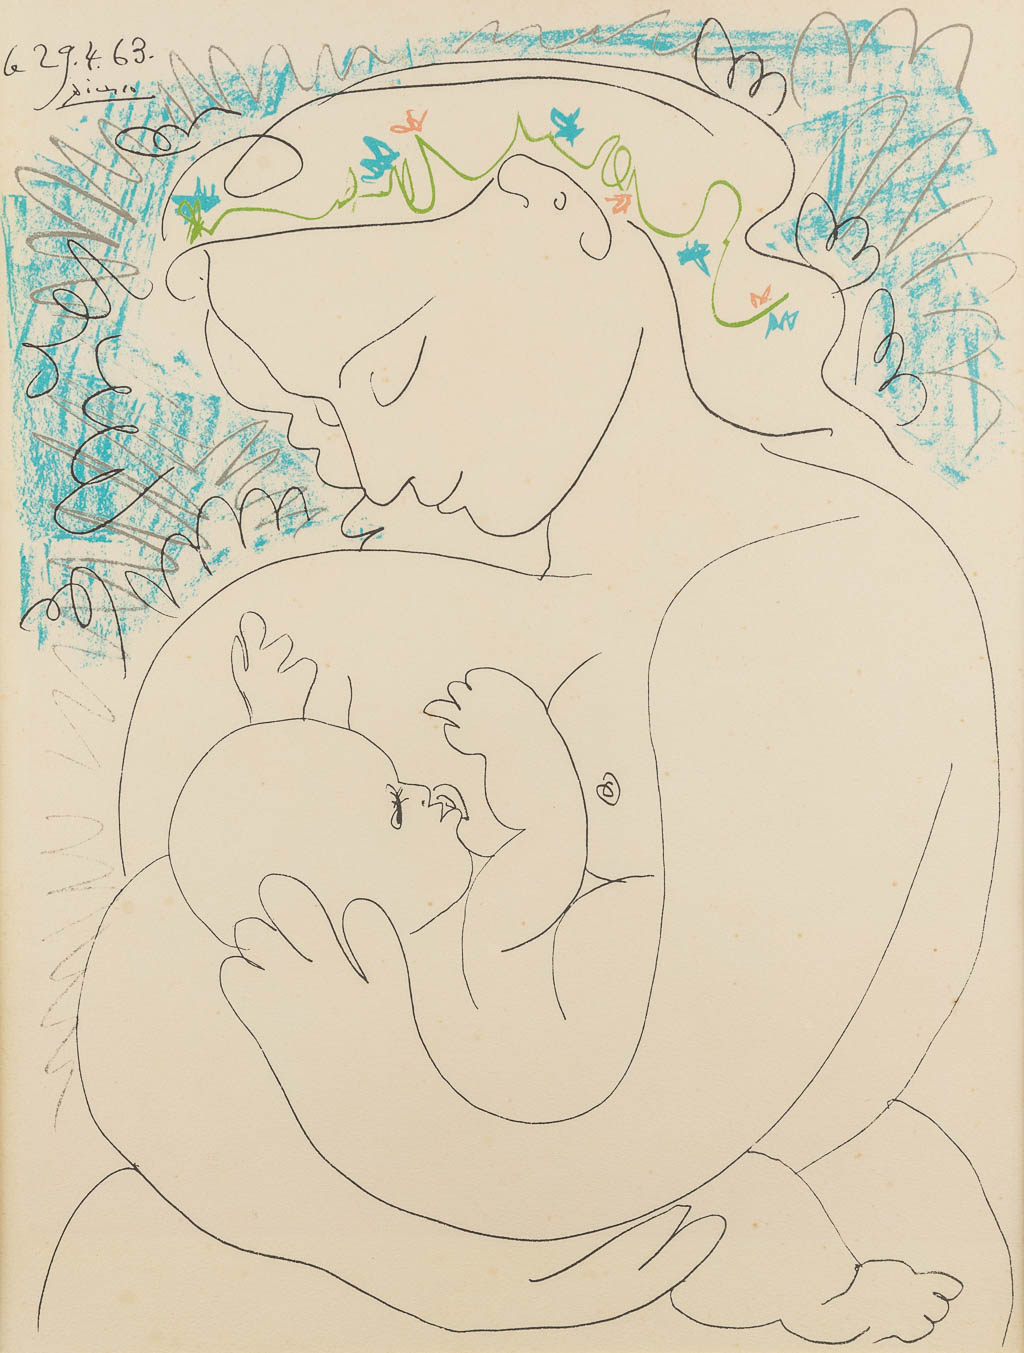 Pablo PICASSO (1881-1973) 'Mother and child' a print. (W:40 x H:51 cm)